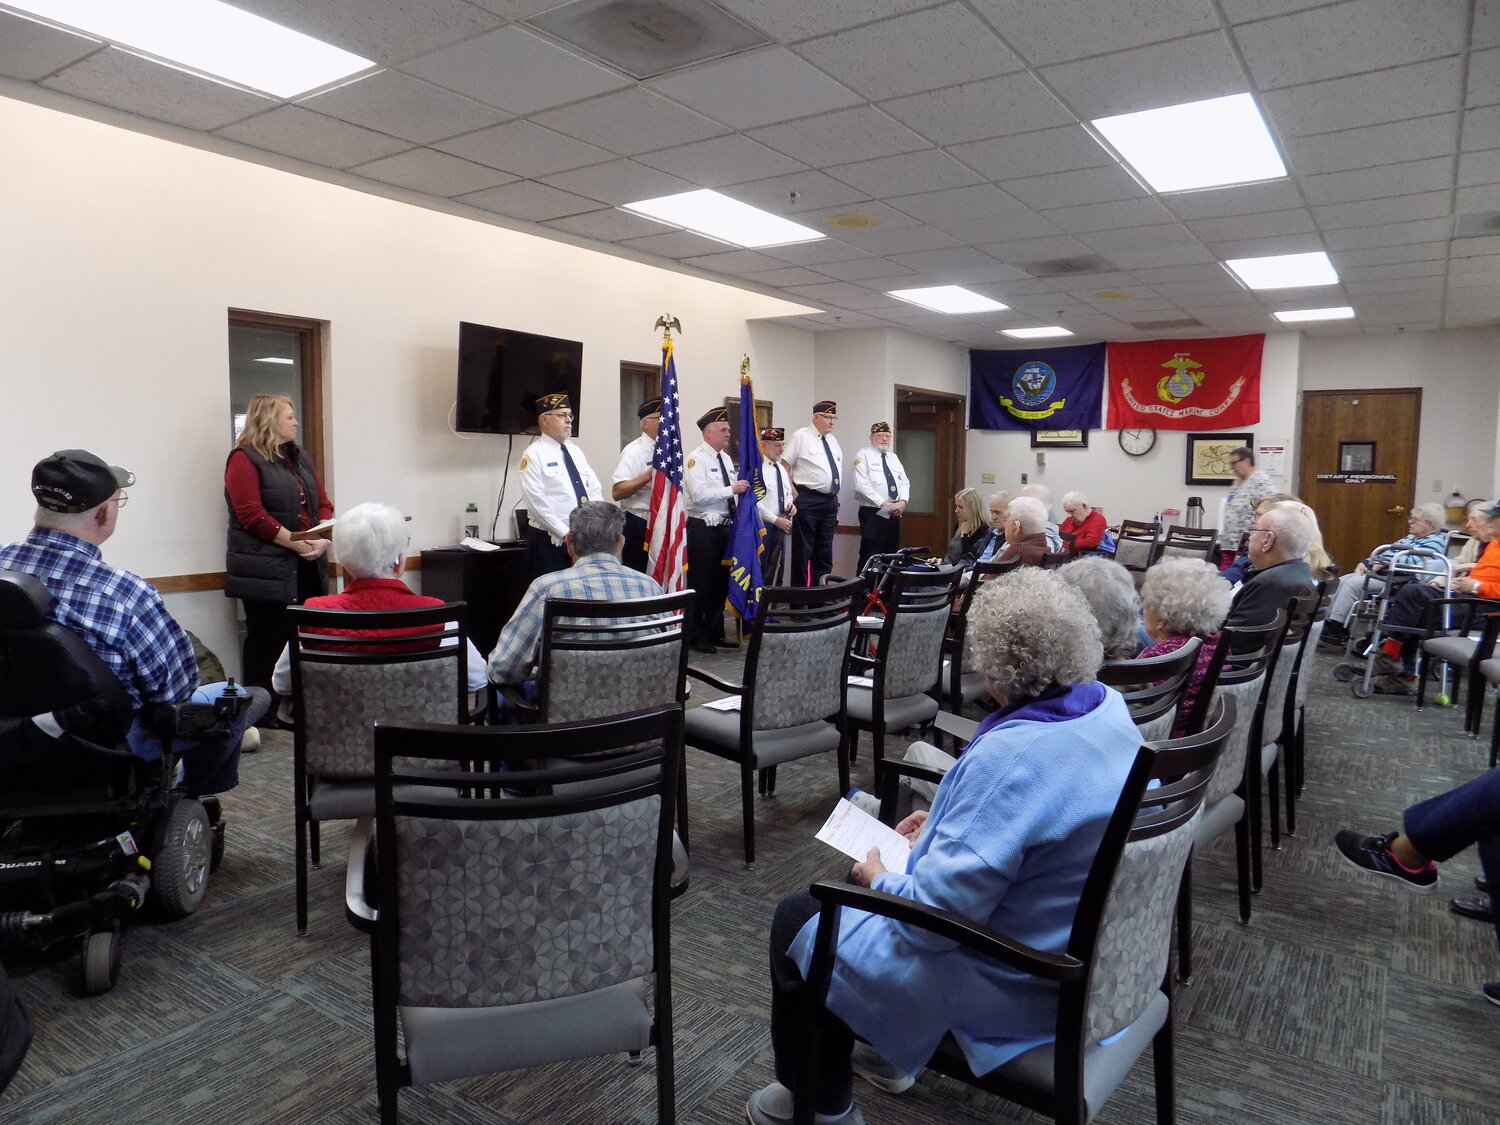 Lone Tree American Legion’s Color Guard posted the colors at Atrium Village’s Veterans Day program in Hills.